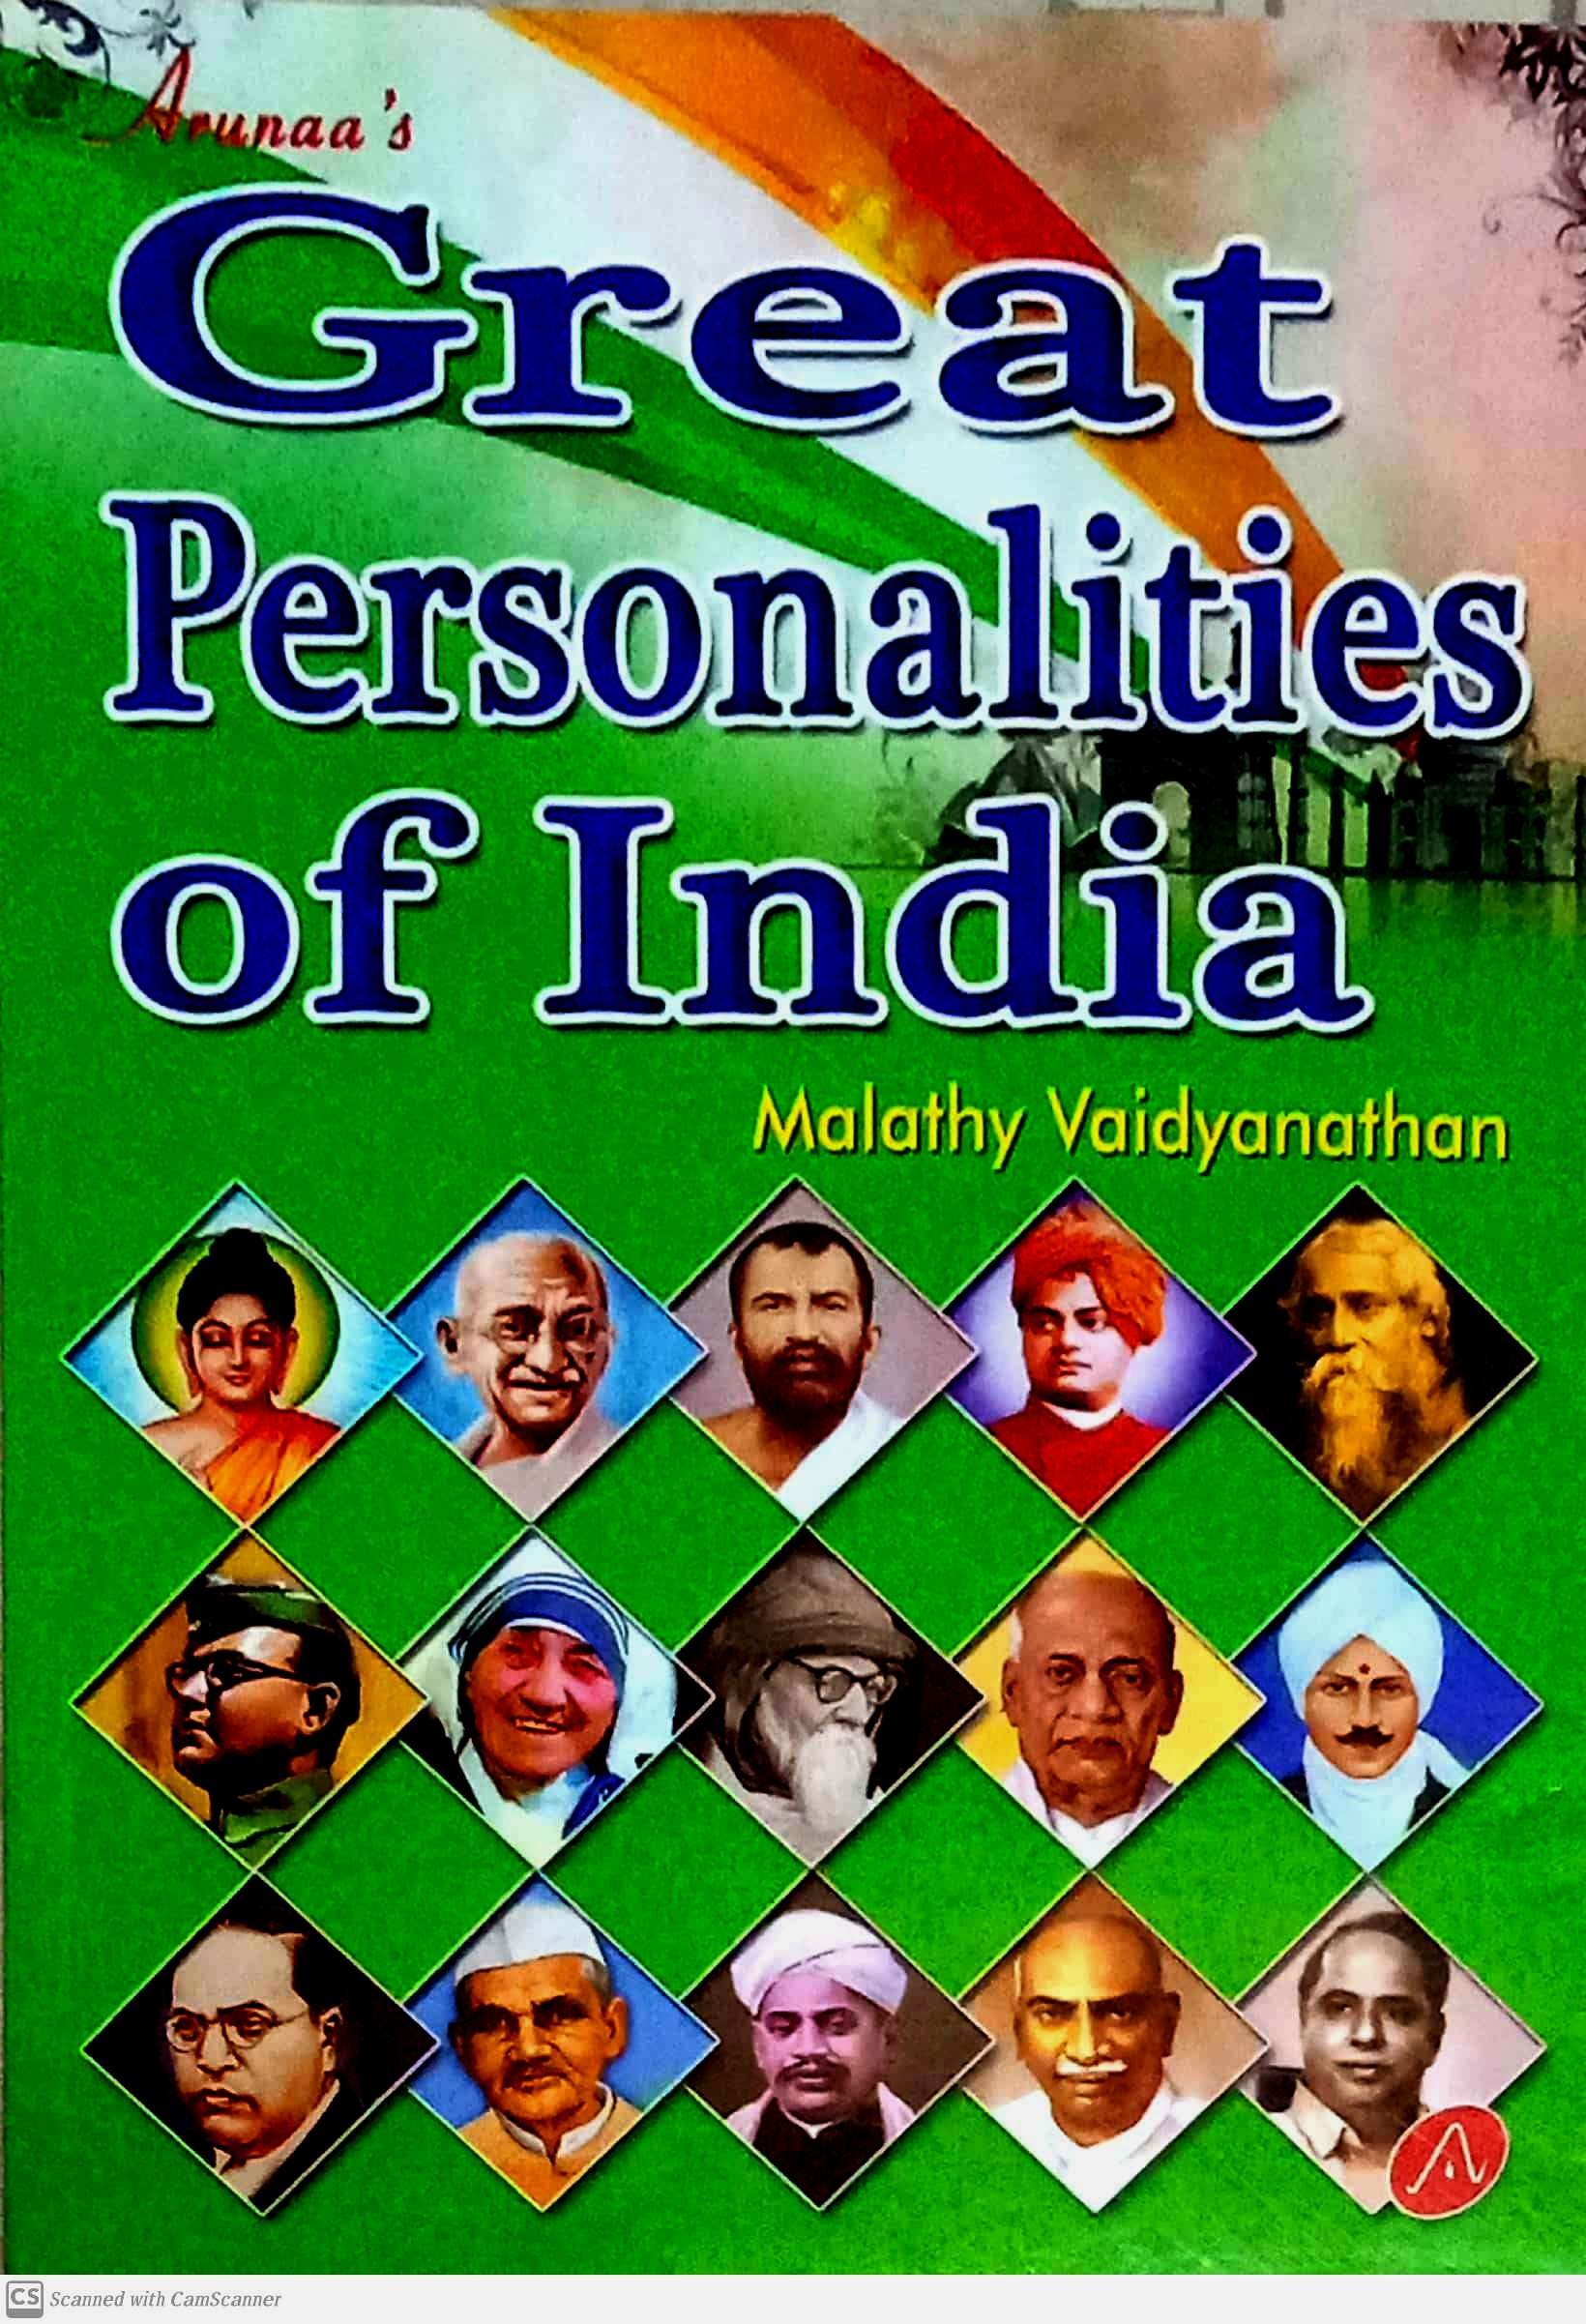 essay on india a land of great personalities